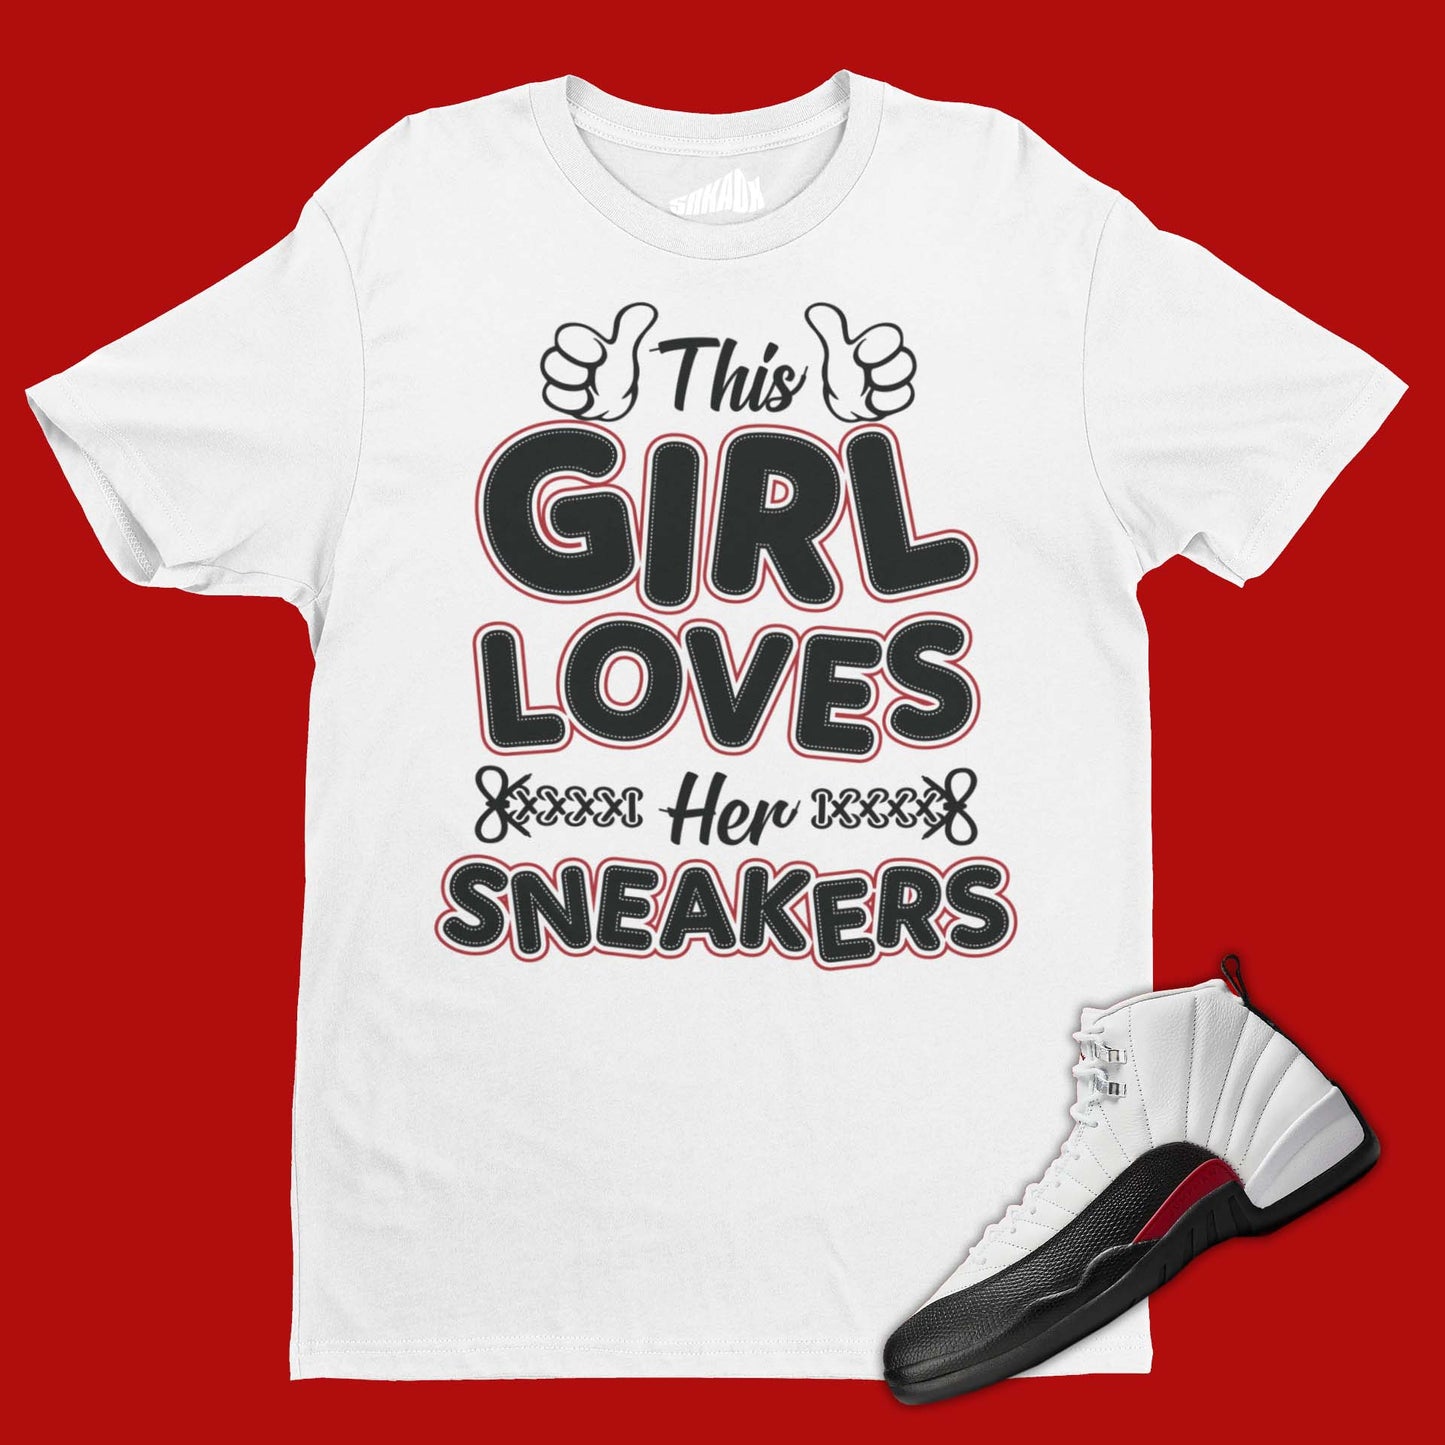 This Girl Loves Her Sneakers T-Shirt Matching Air Jordan 12 Red Taxi